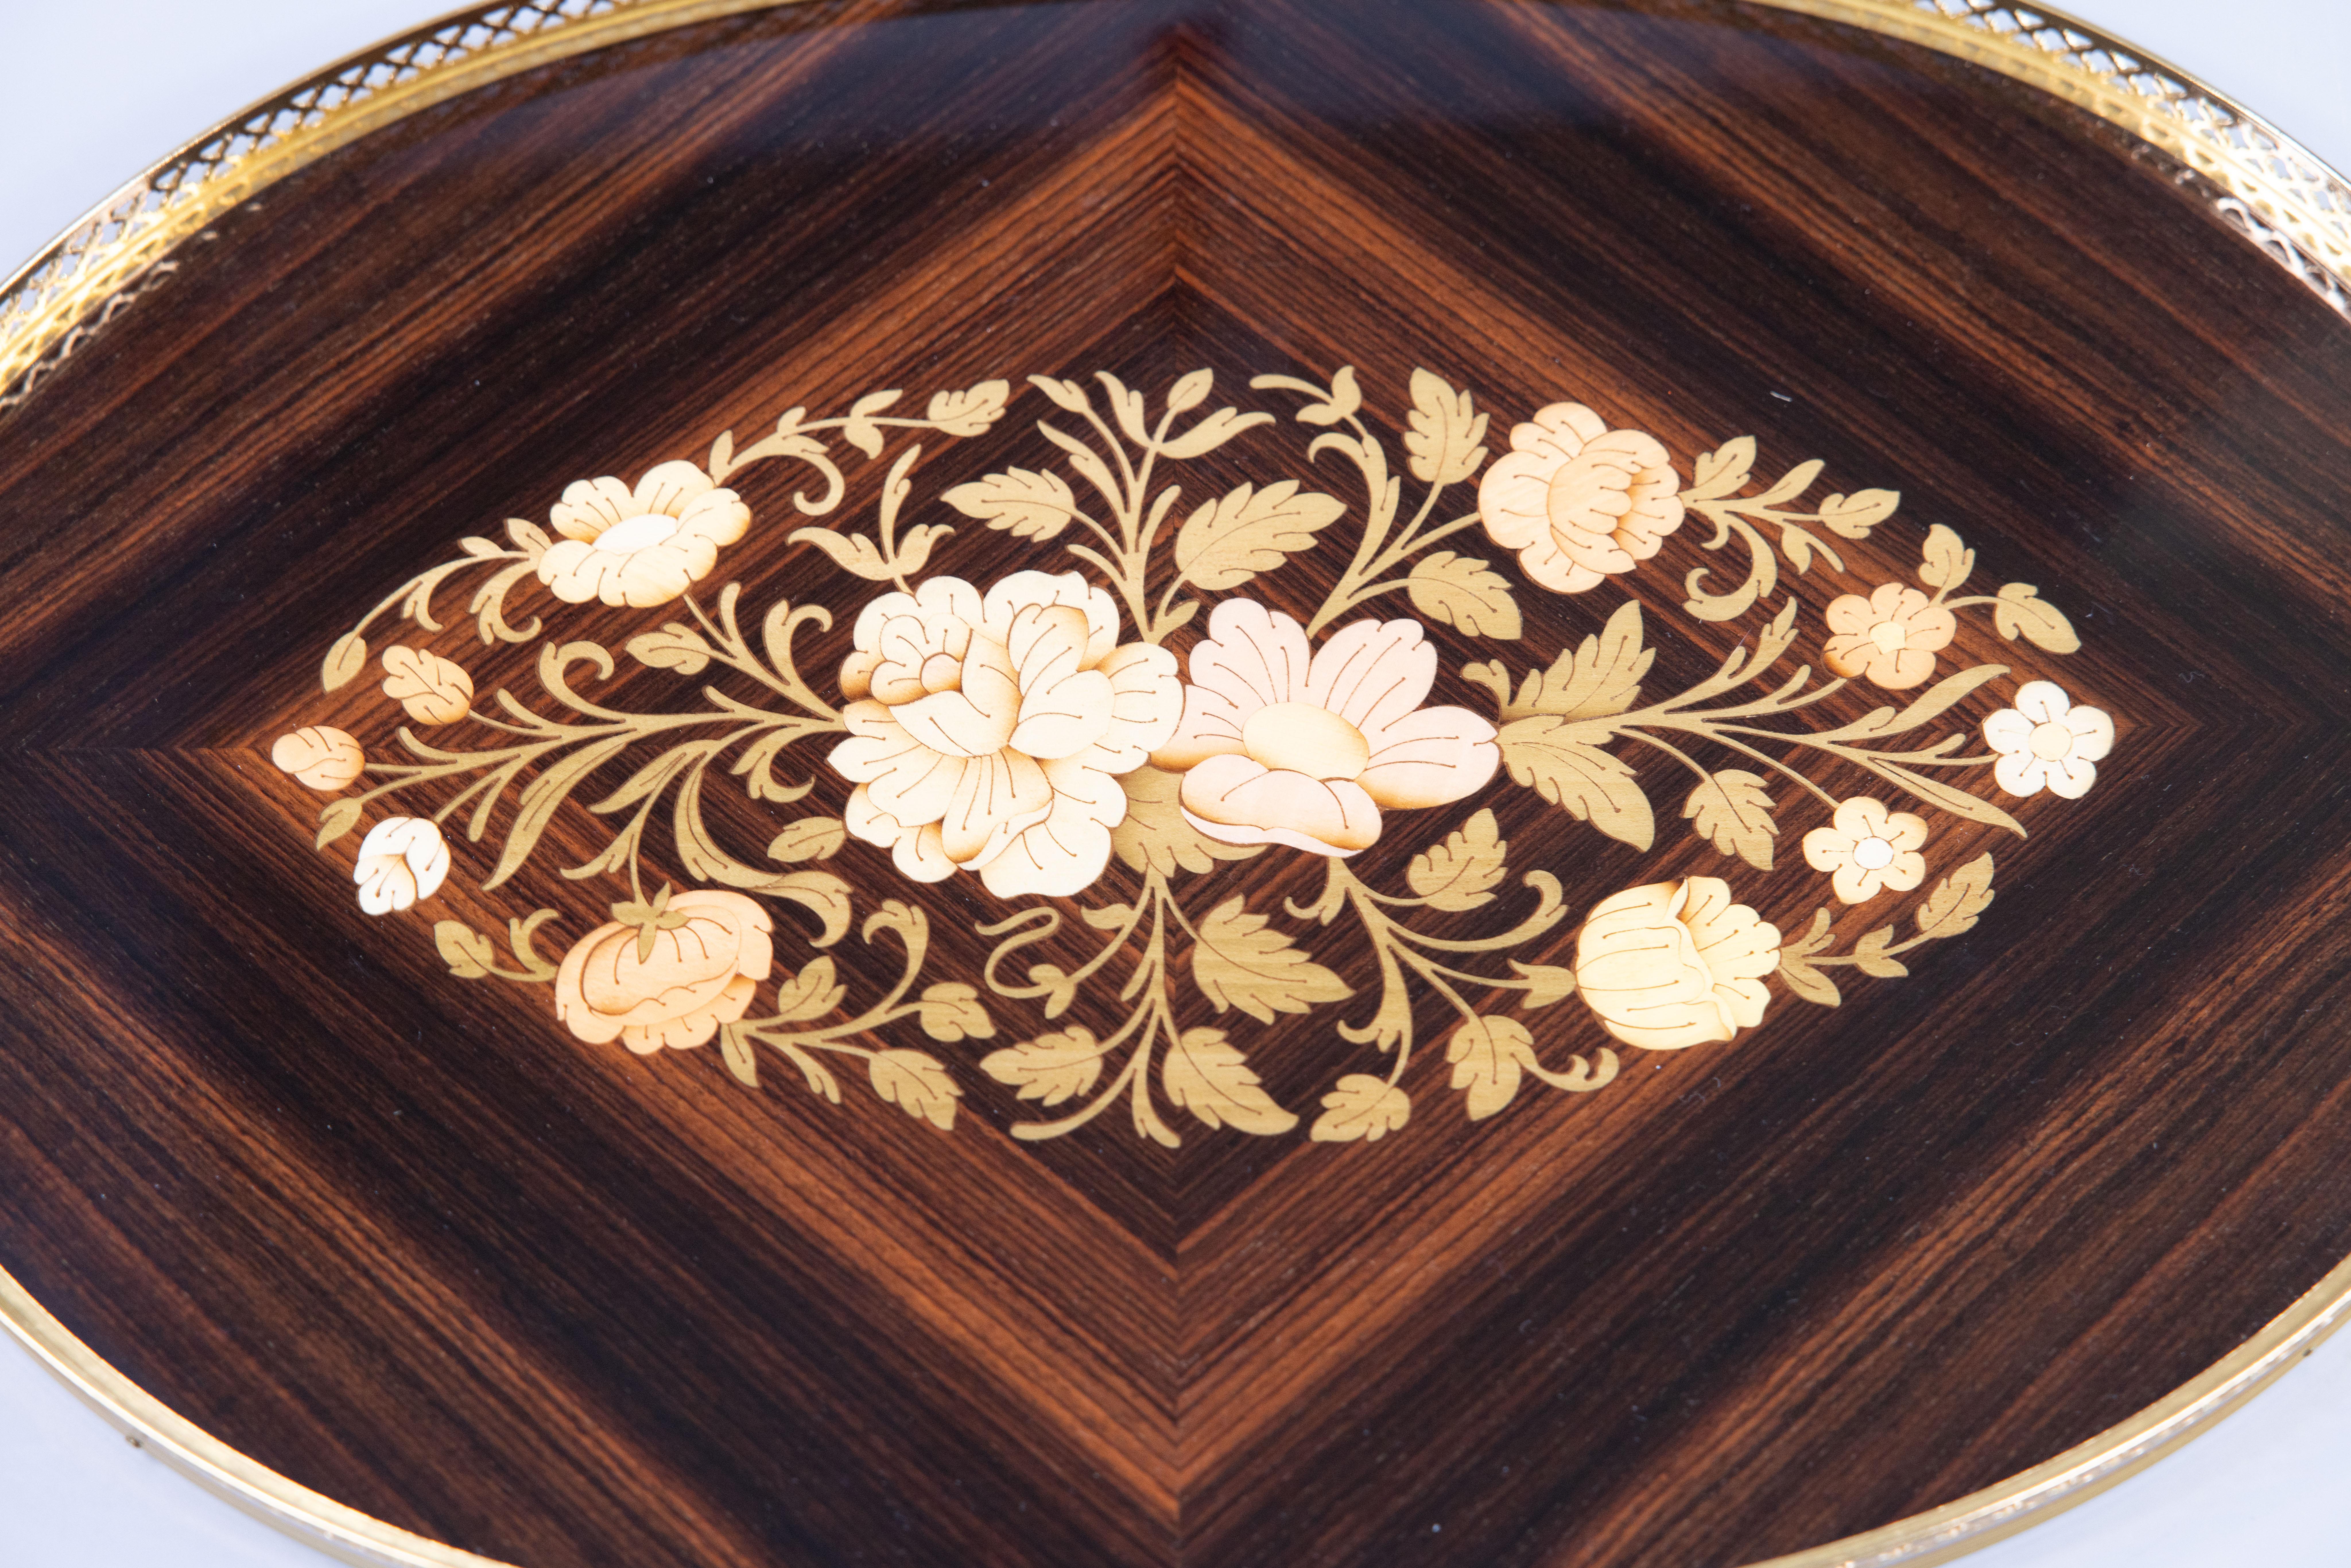 A lovely vintage Italian marquetry lacquered rosewood oval serving or barware tray, circa 1950. Marked 